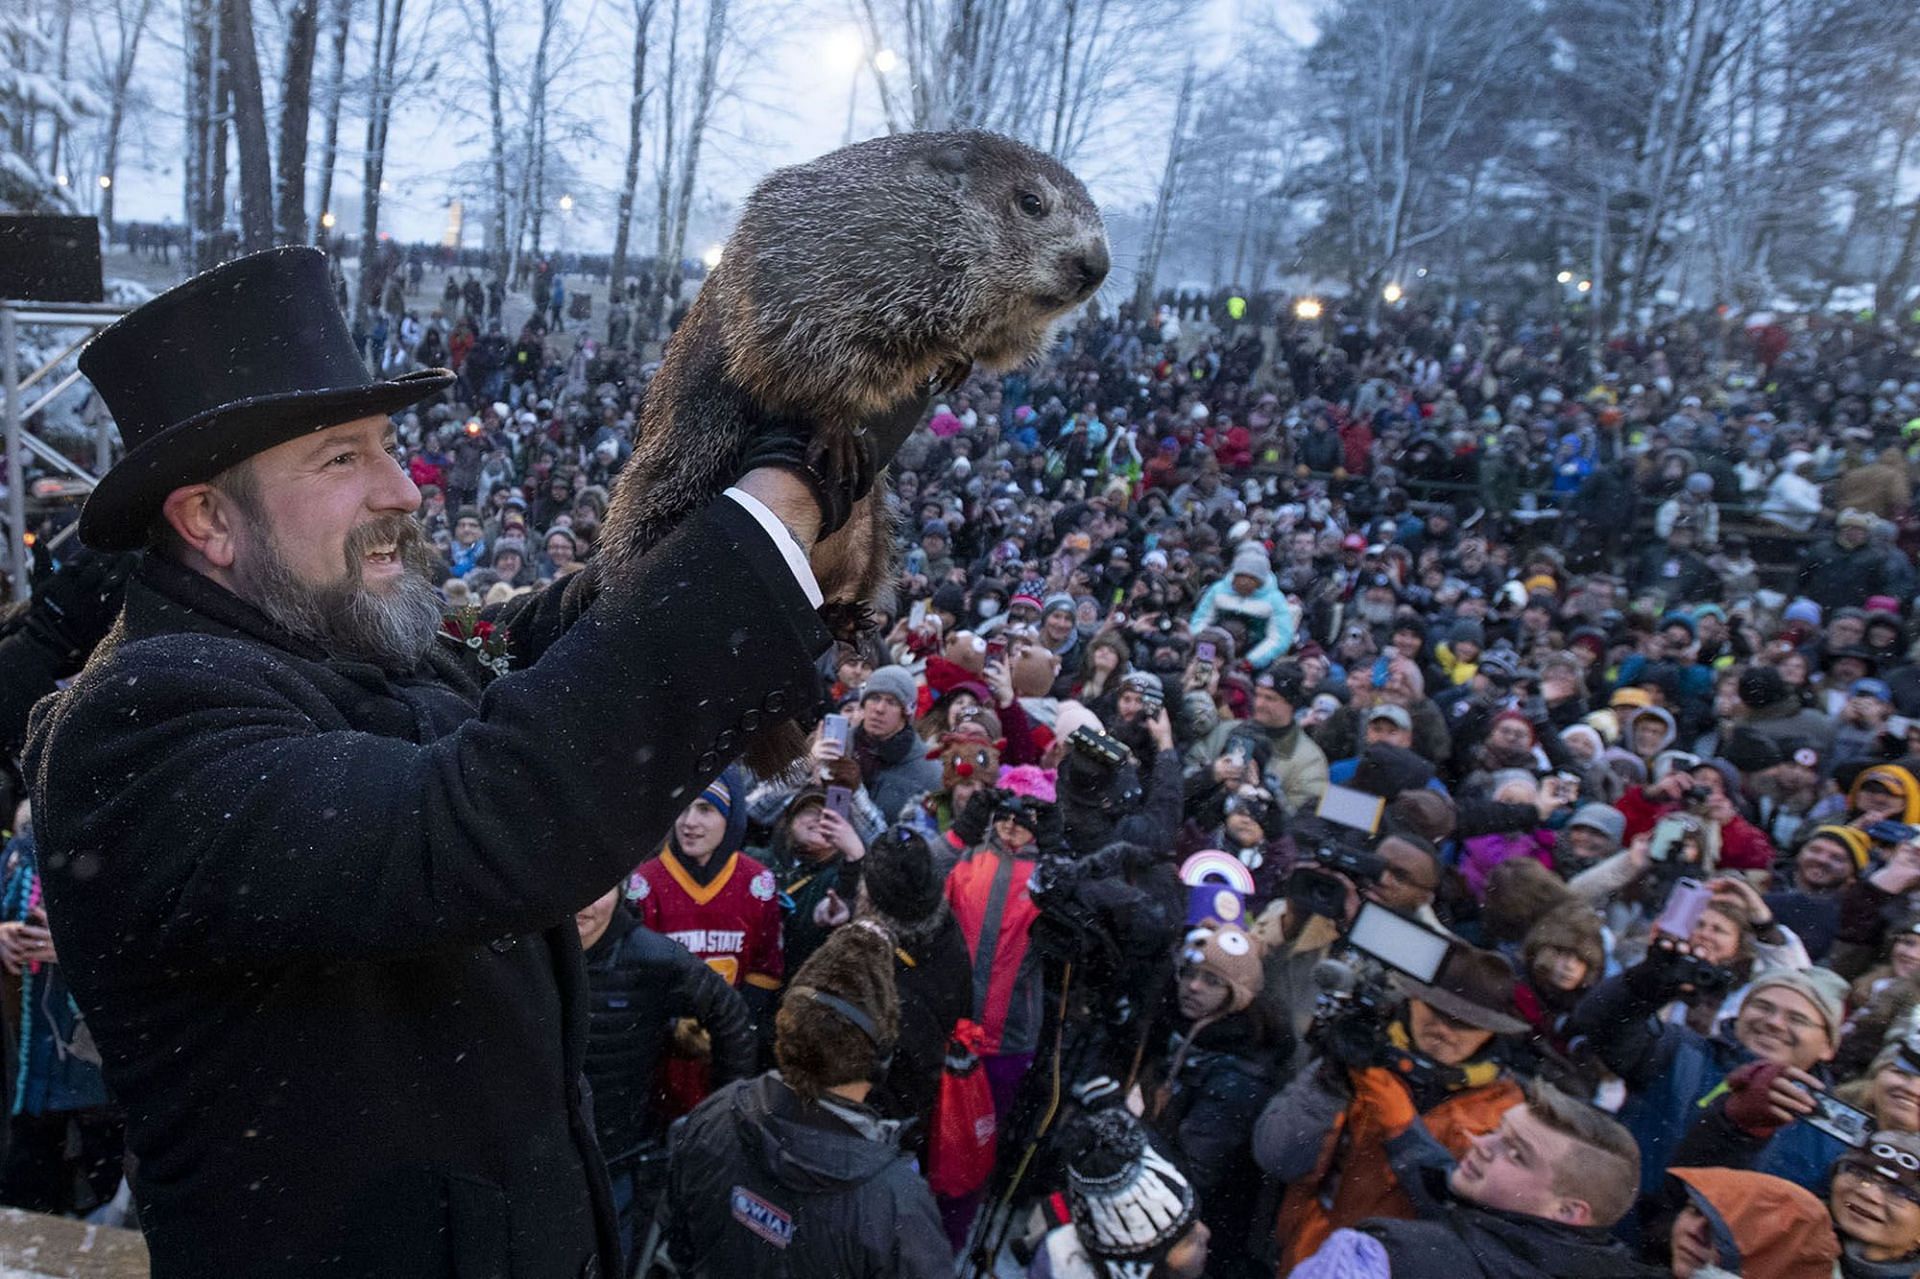 Groundhog Day to be celebrated on February 2 with Phil and Chuck making their predictions (Image via AP Photo)